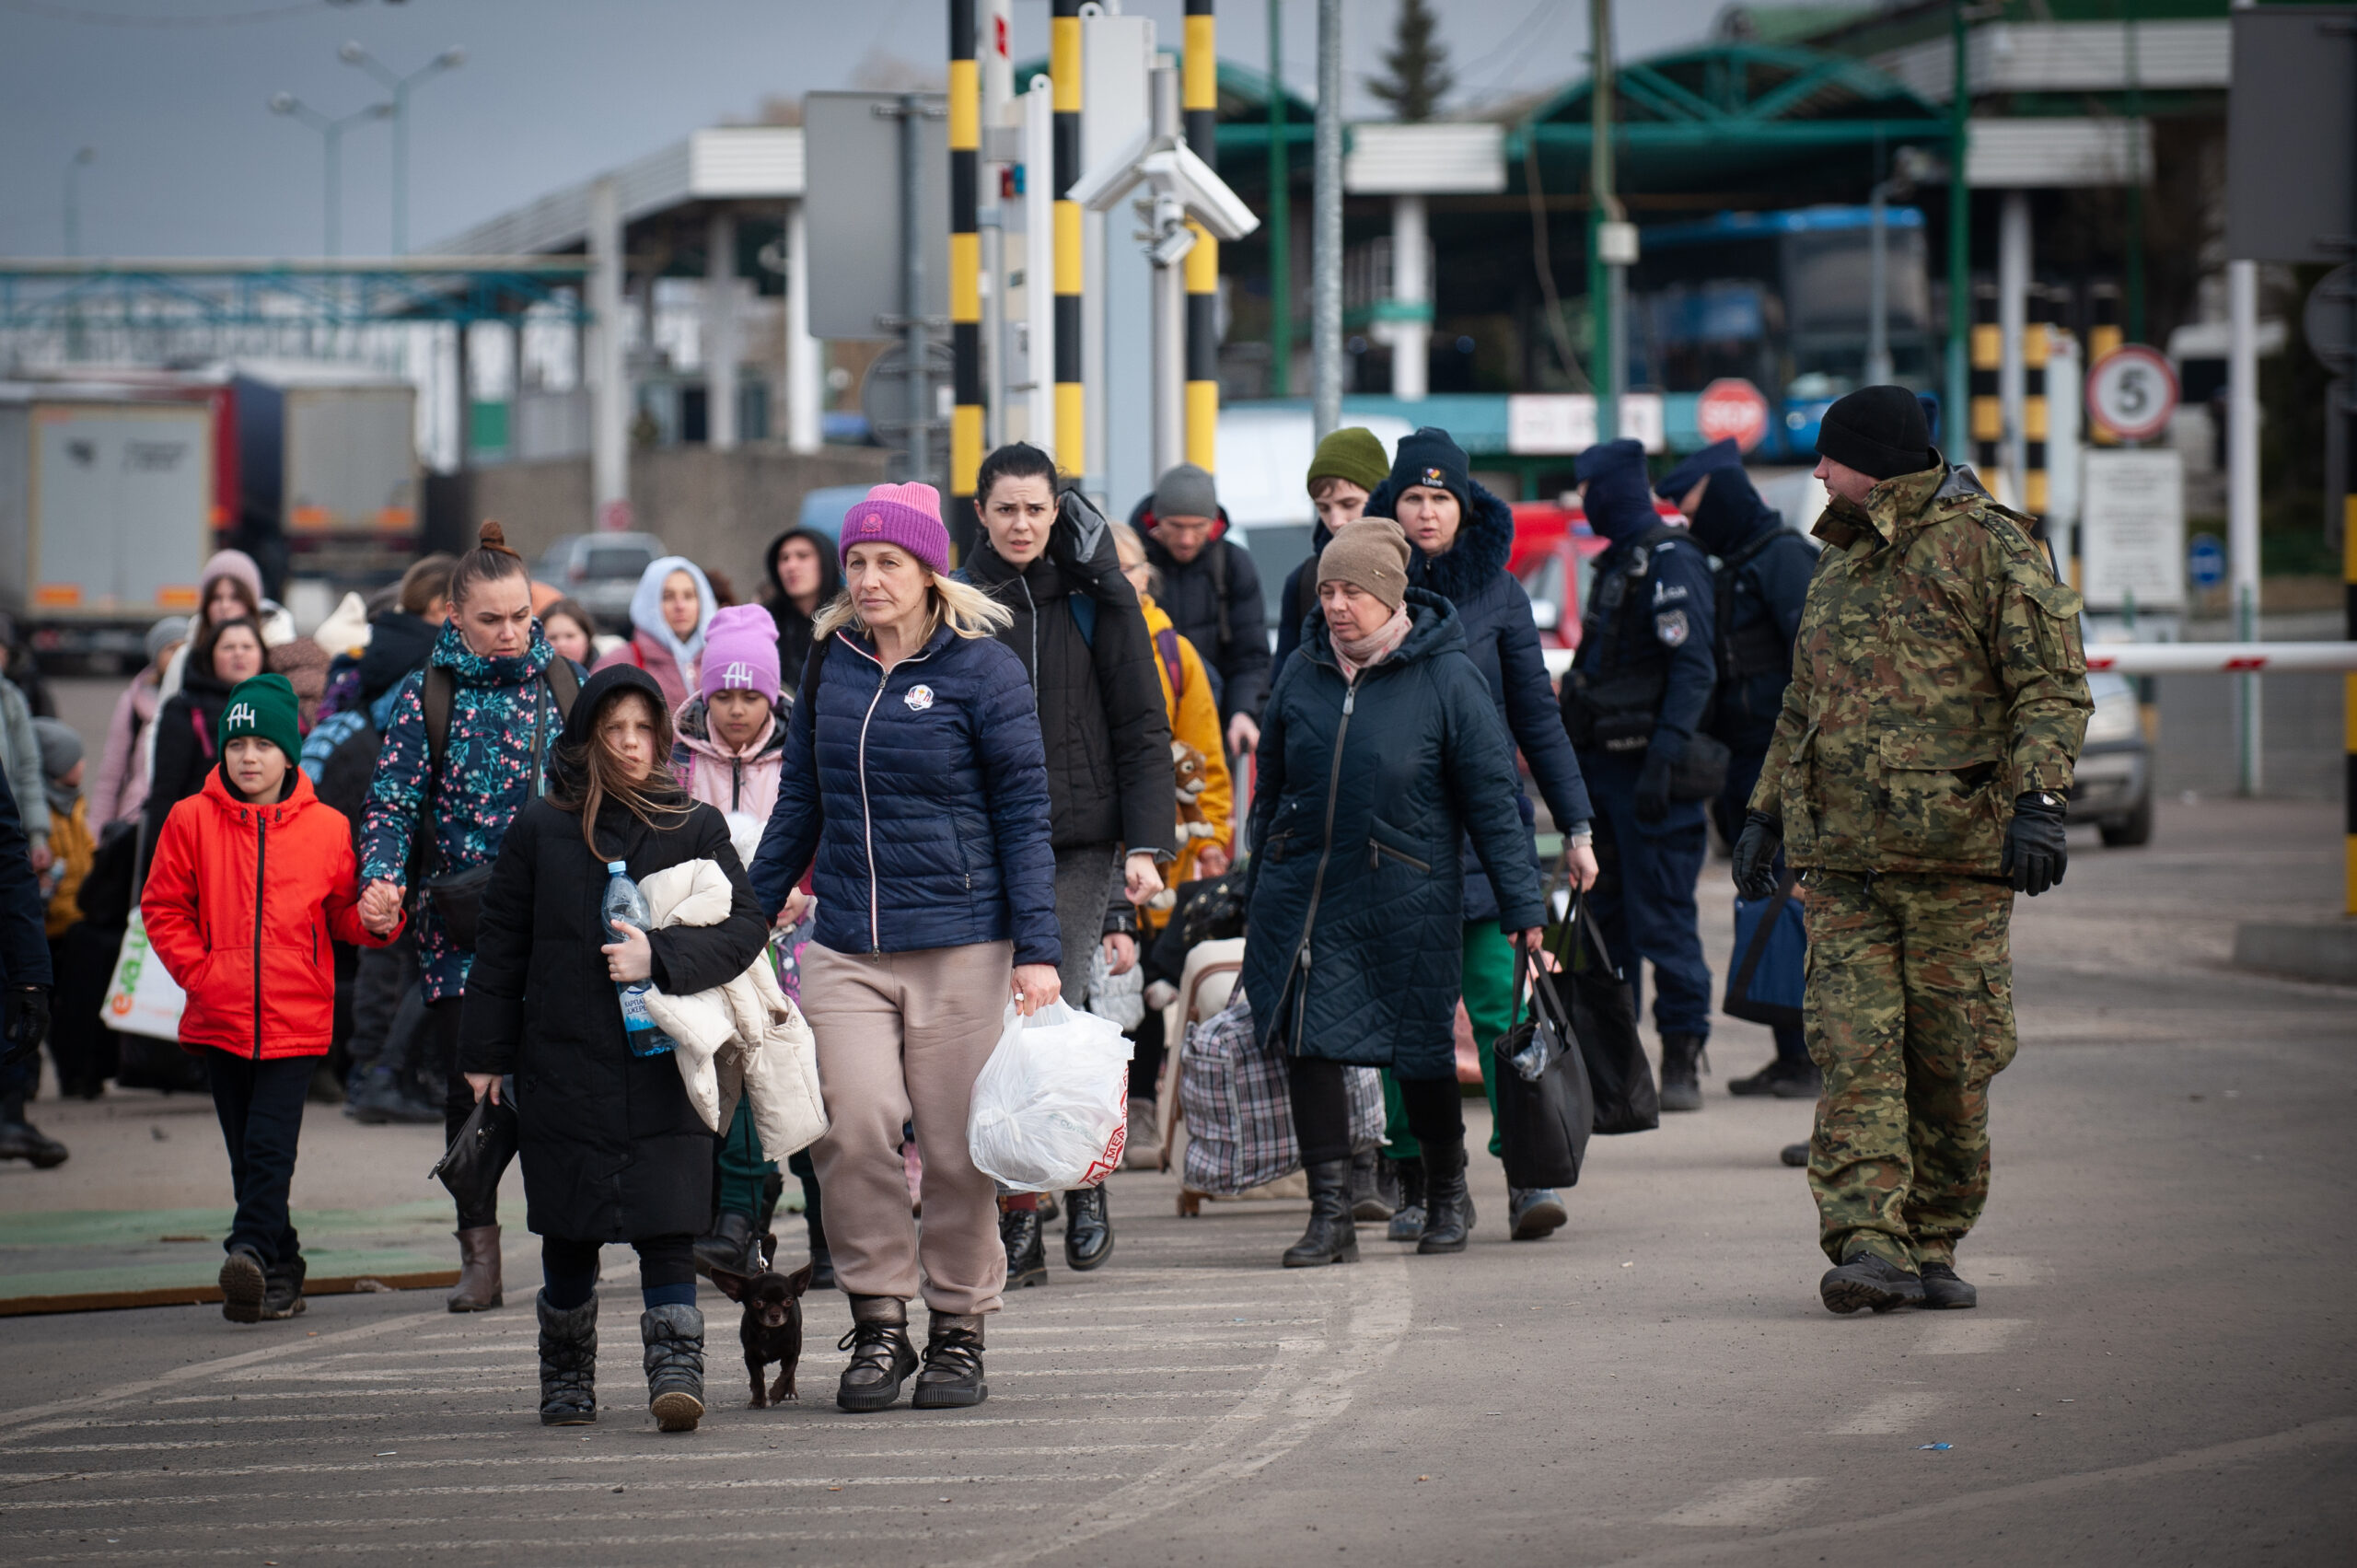 Refugees from Ukraine cross the border into Poland, crisis related to the war in Ukraine, in Medyka,  Polish-Ukrainian bordercross, Poland on March 2, 2022.